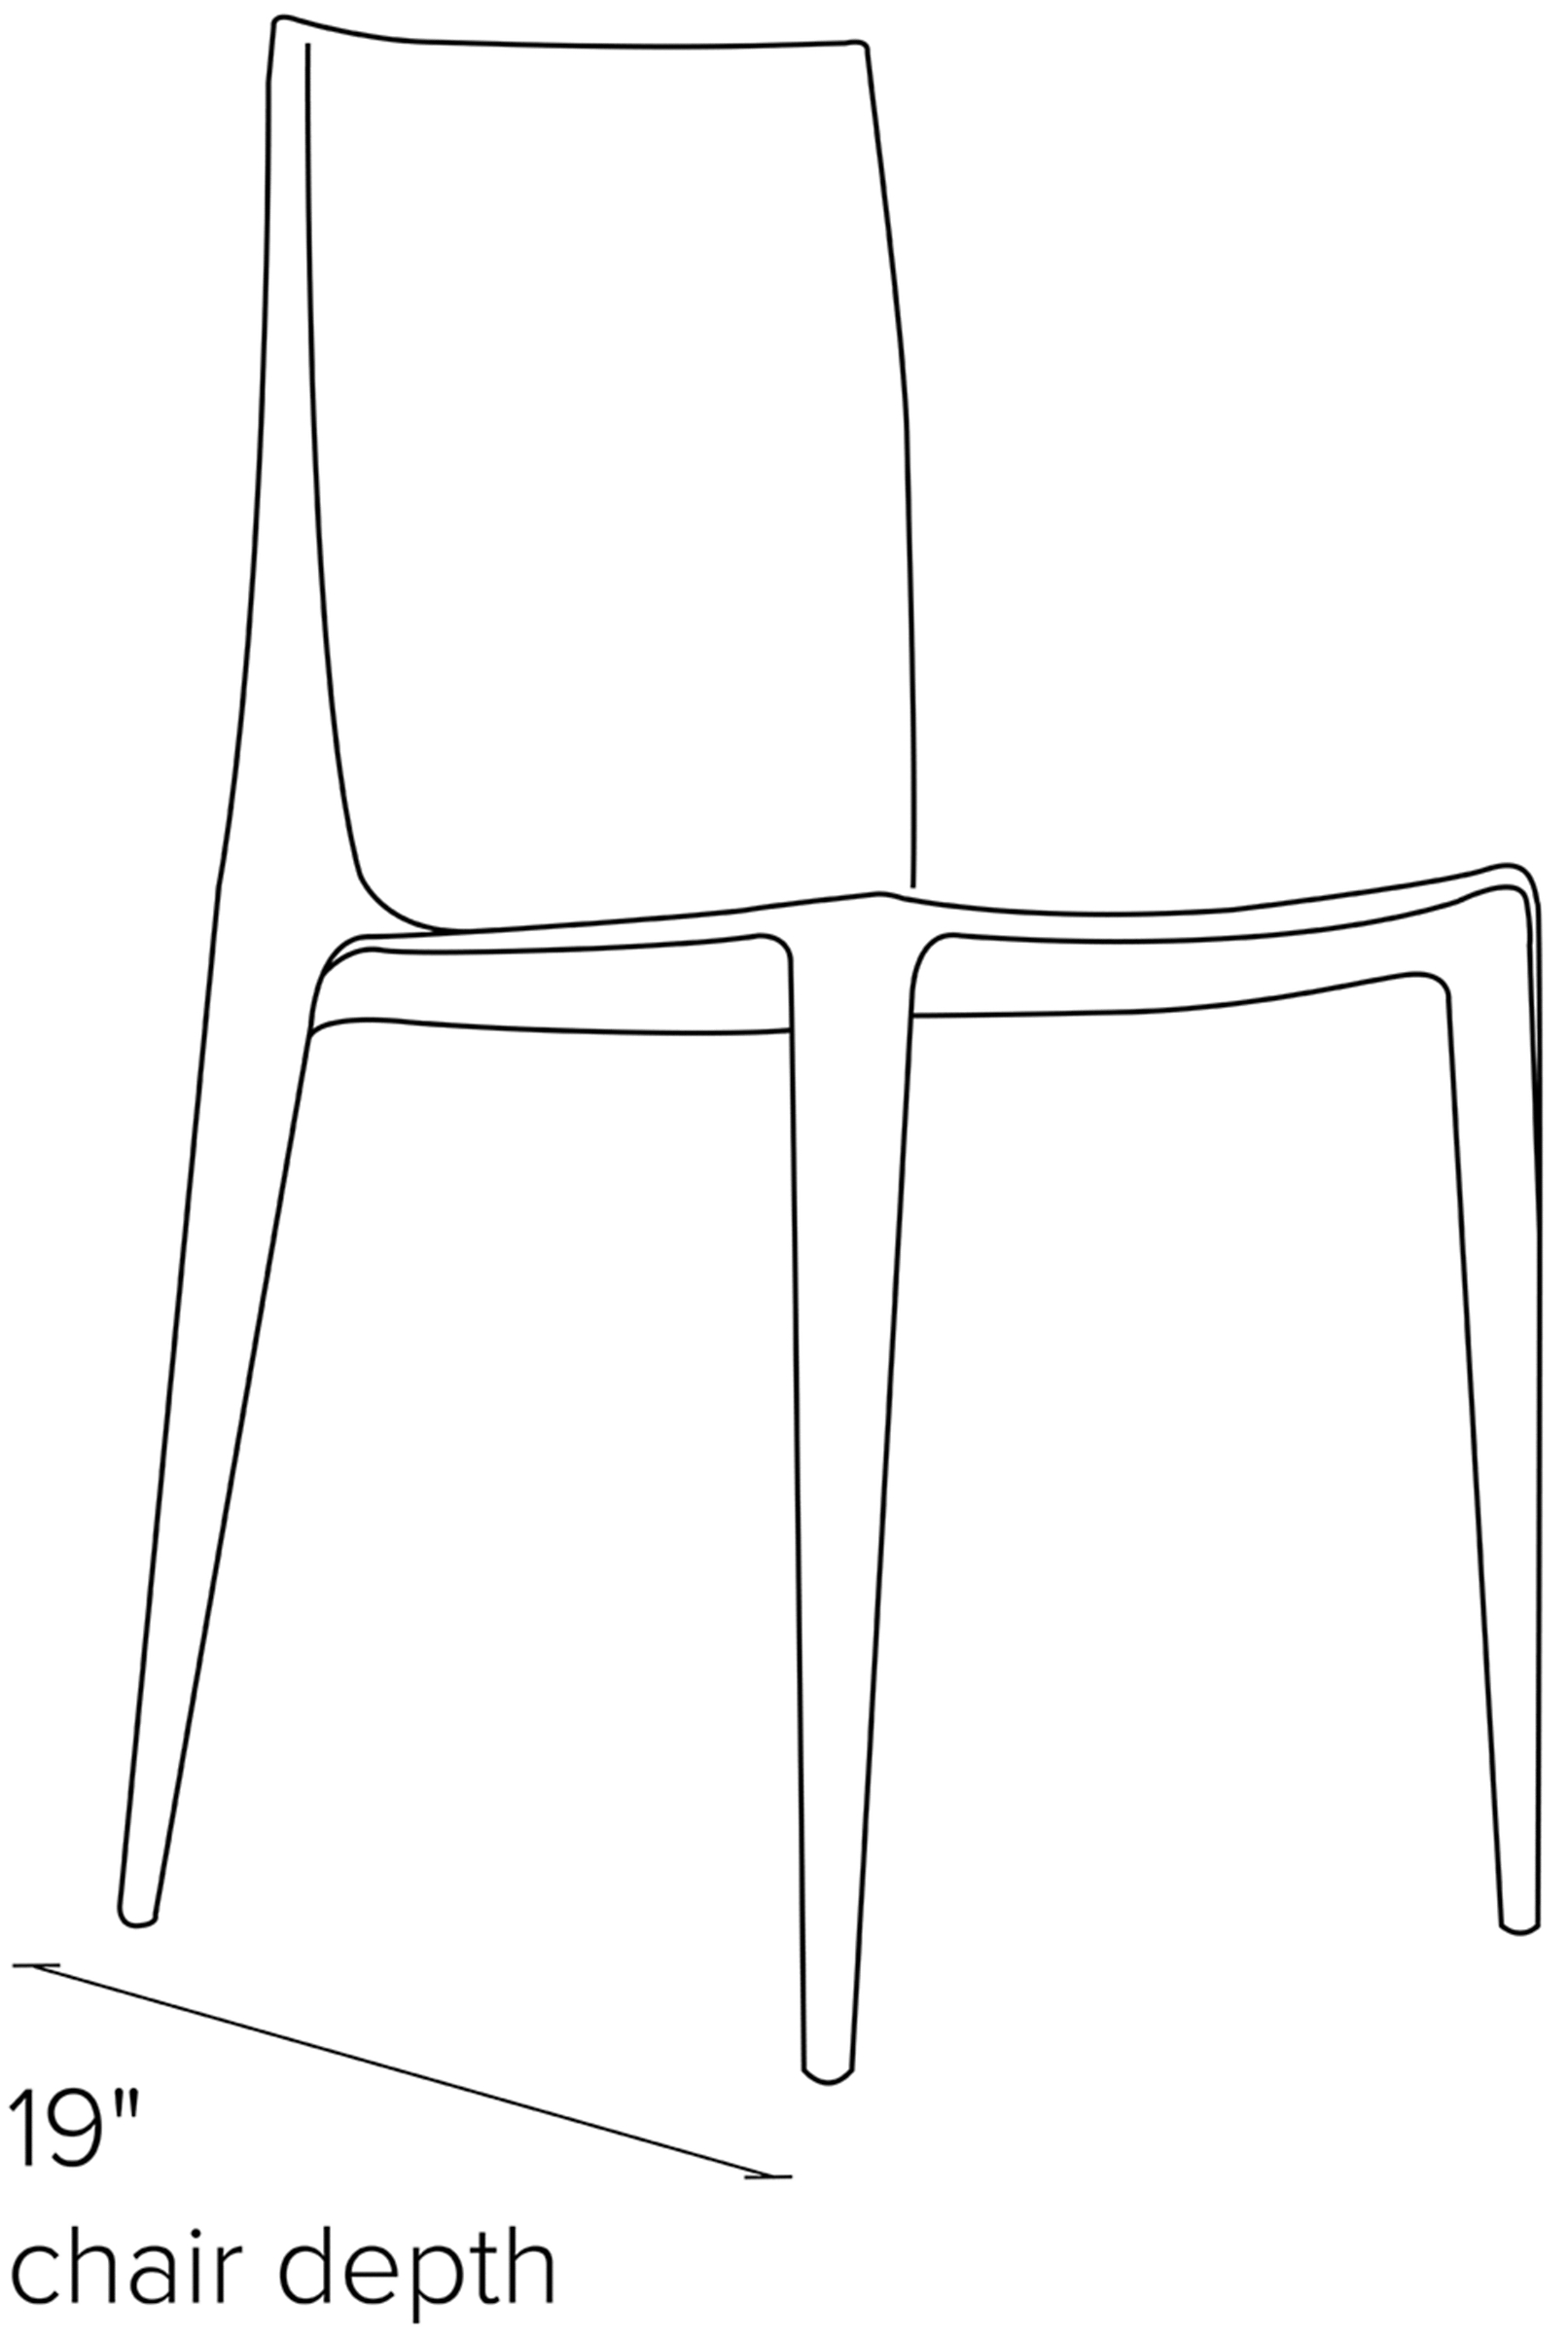 Side view dimension illustration of Bellini chair.